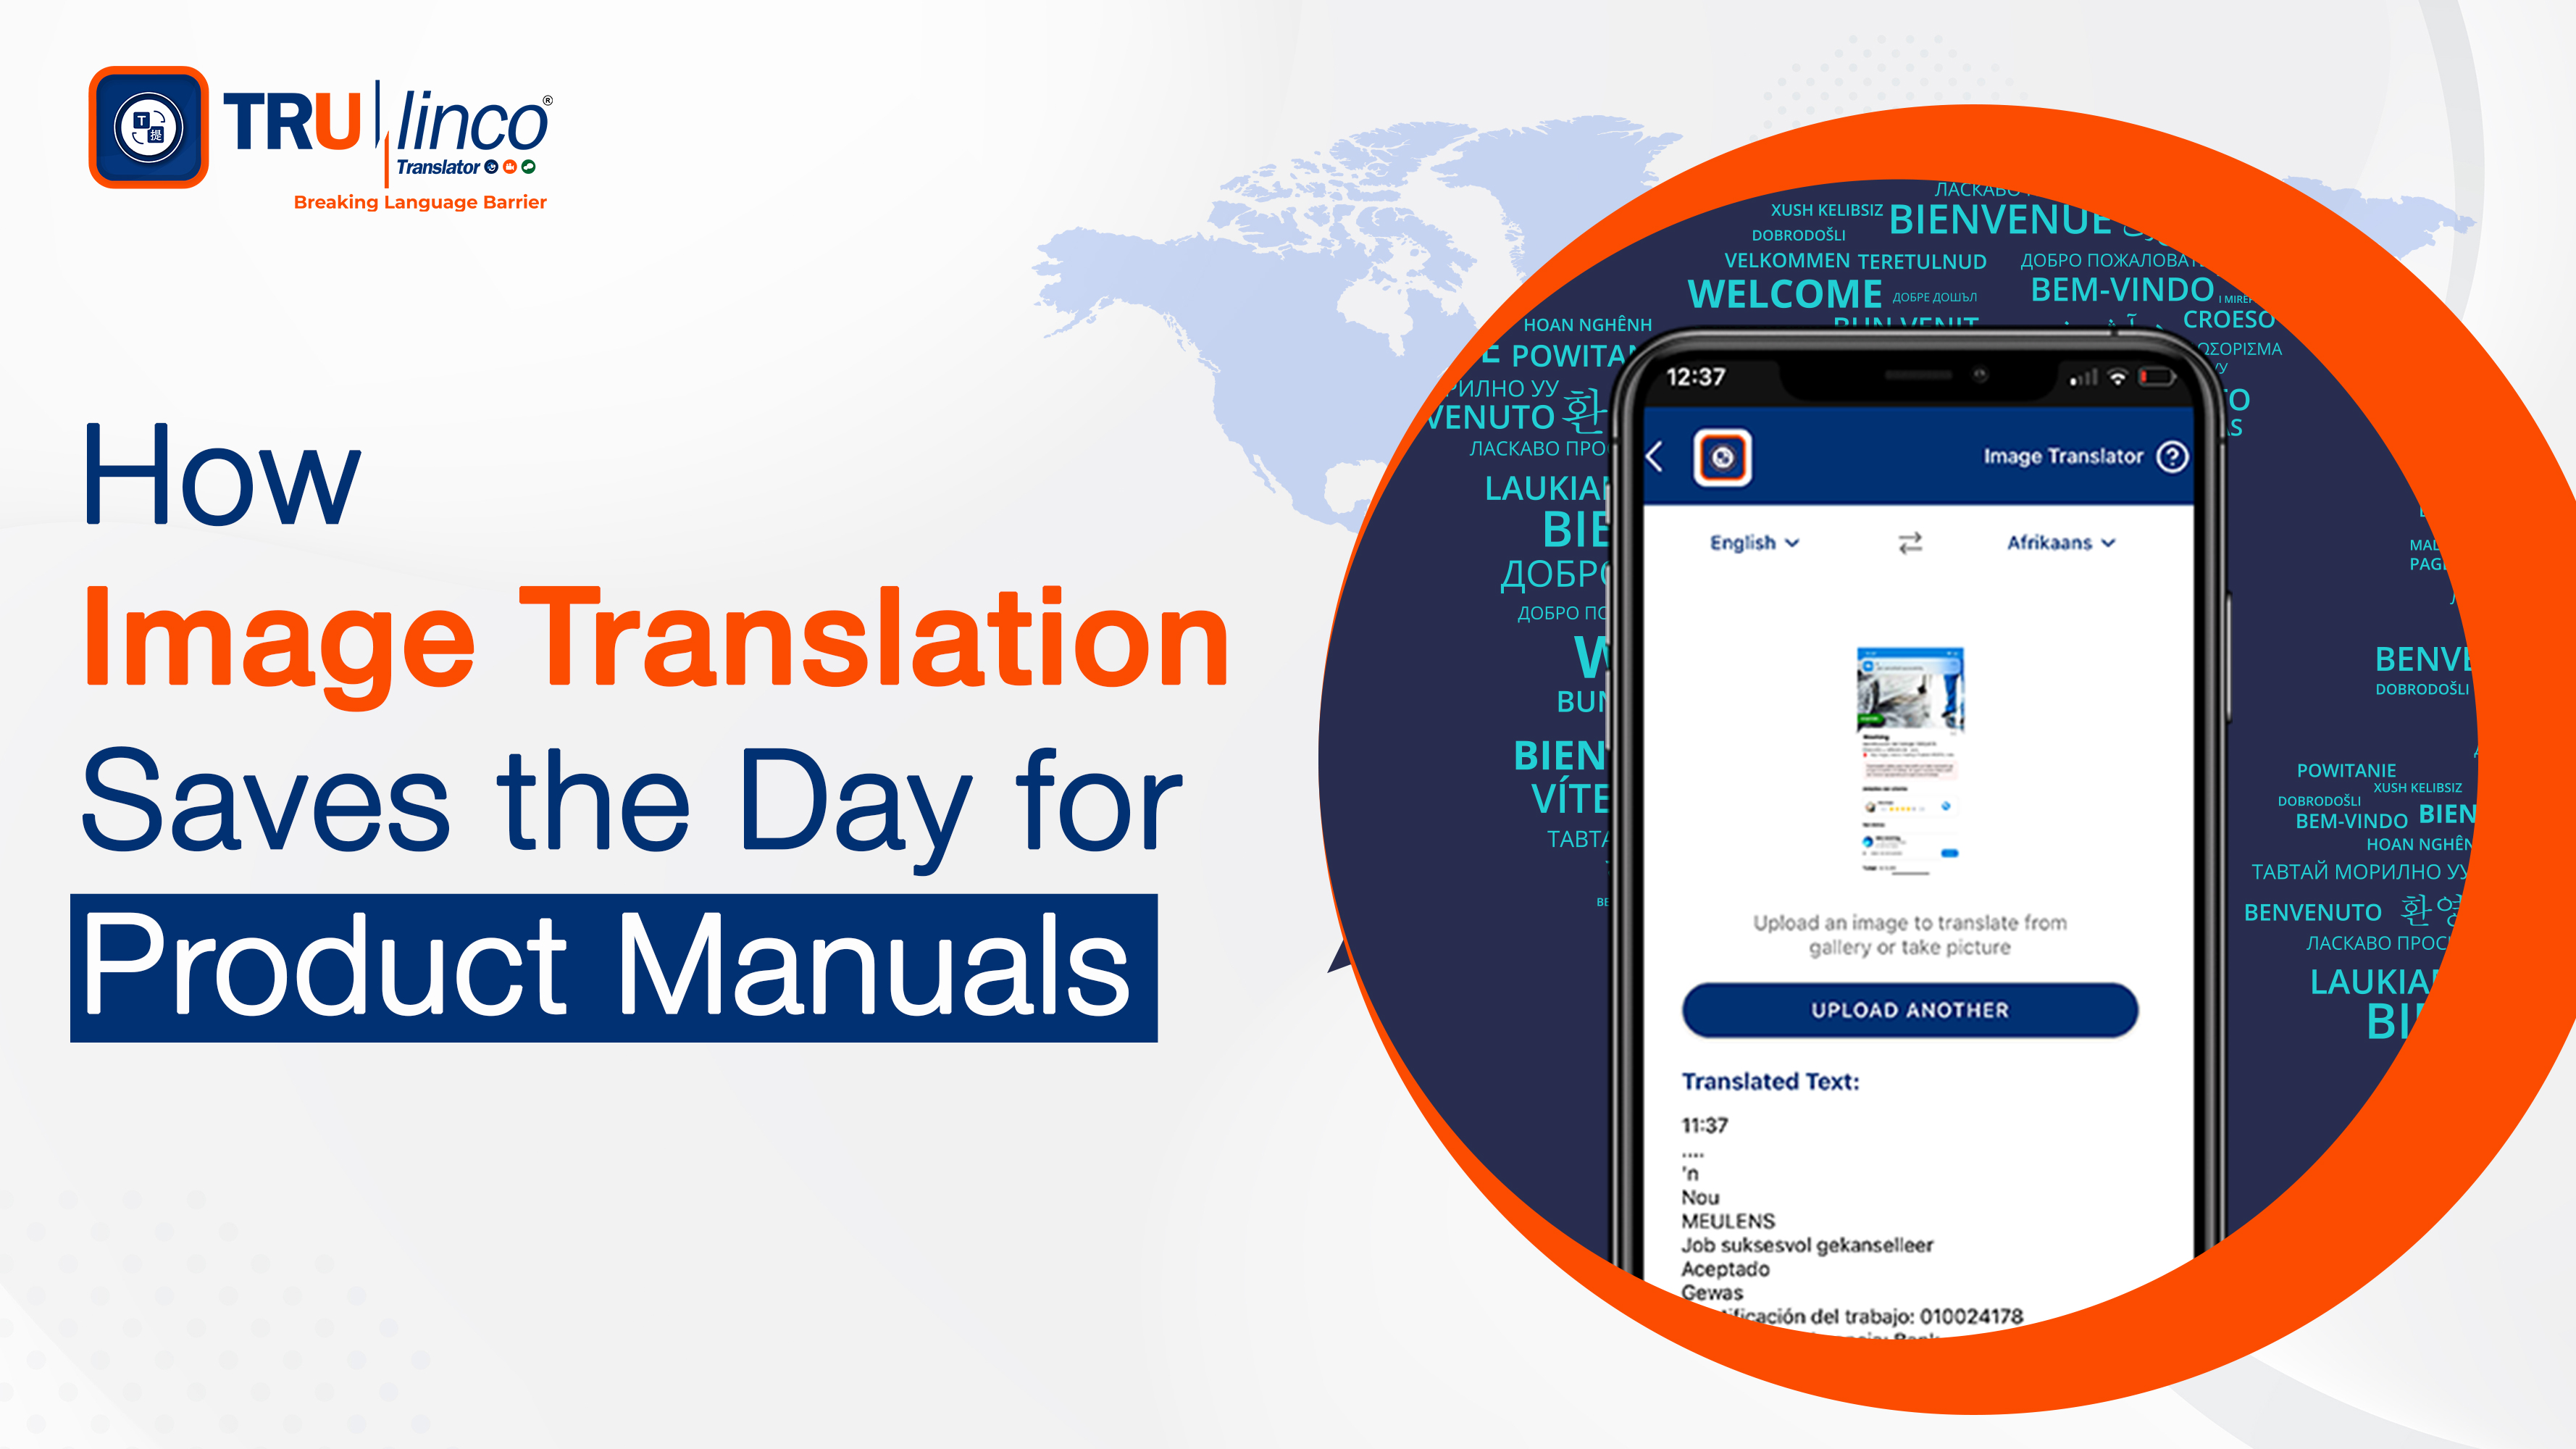 How Image Translation Saves the Day for Product Manuals